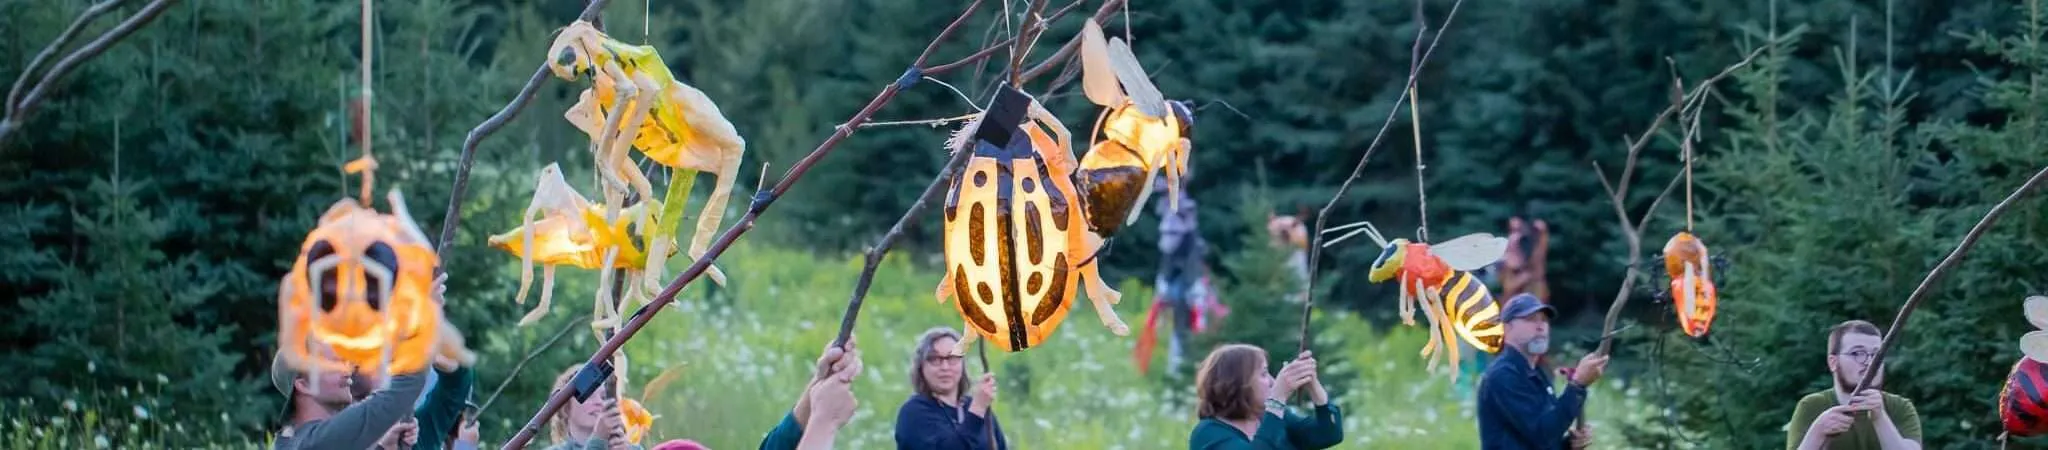 People in a field hold up illuminated lanterns in the shape of insects.